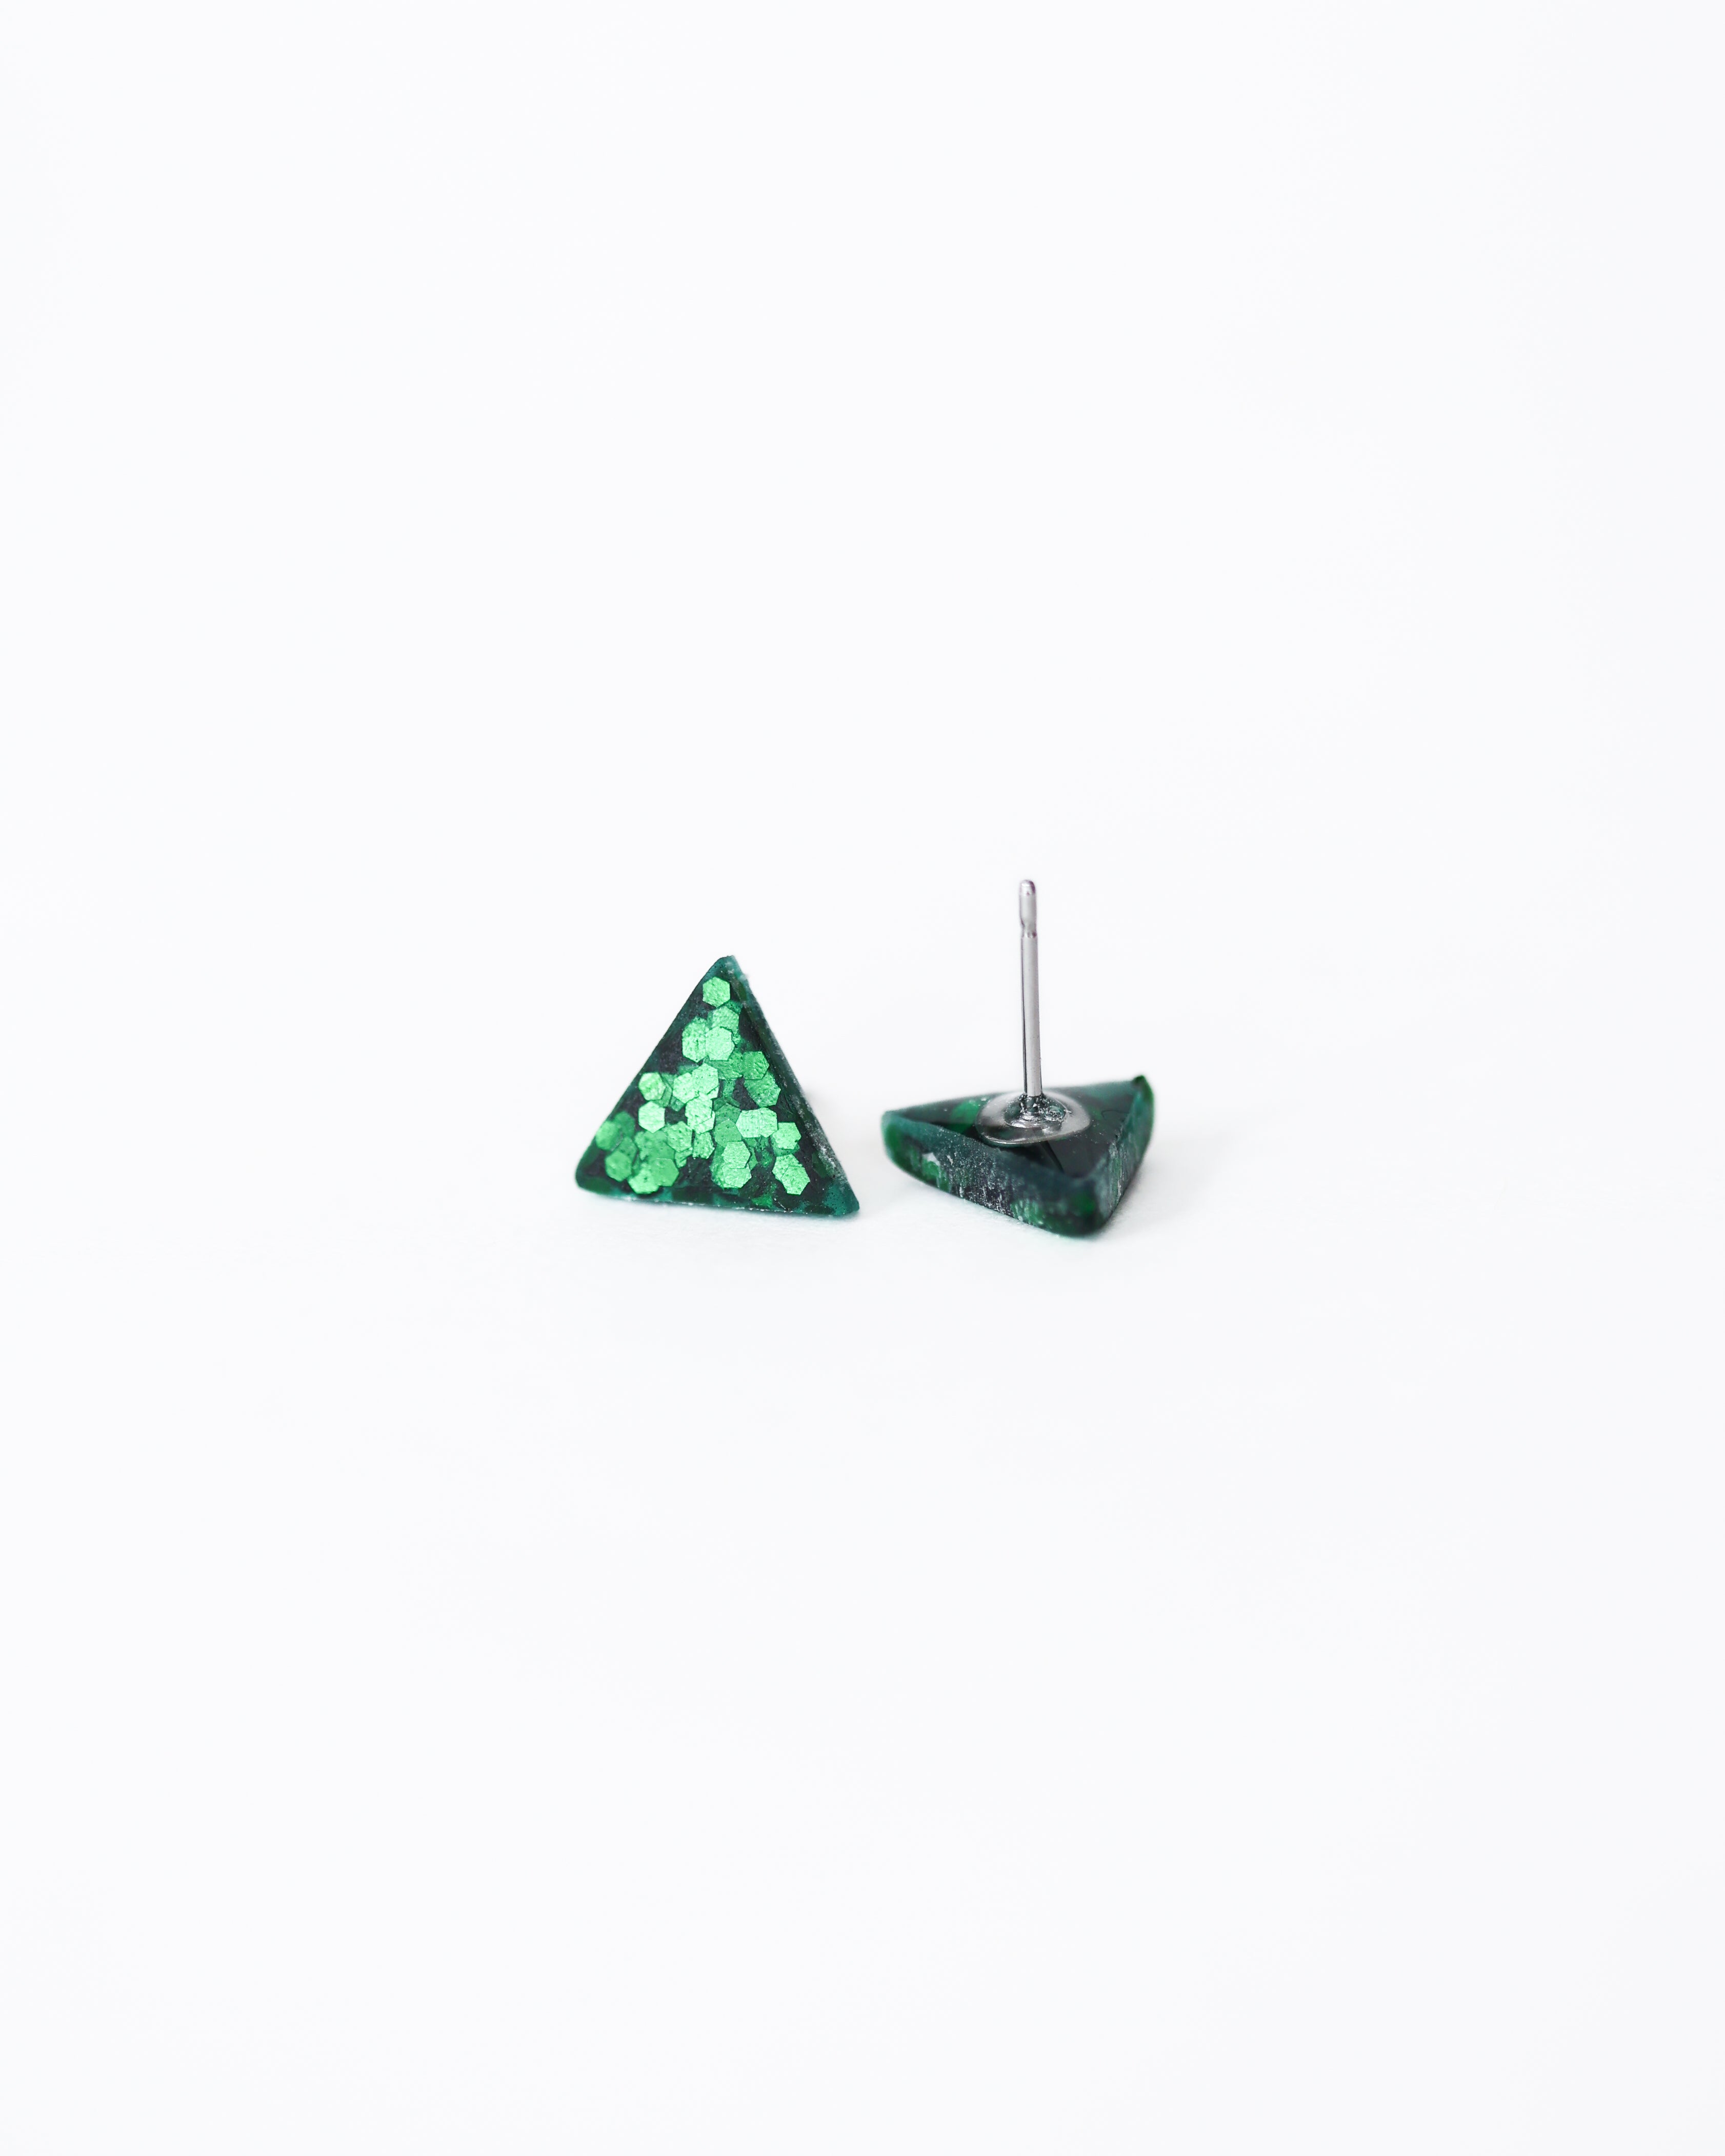 Minimalist triangle stud earrings with surgical steel posts